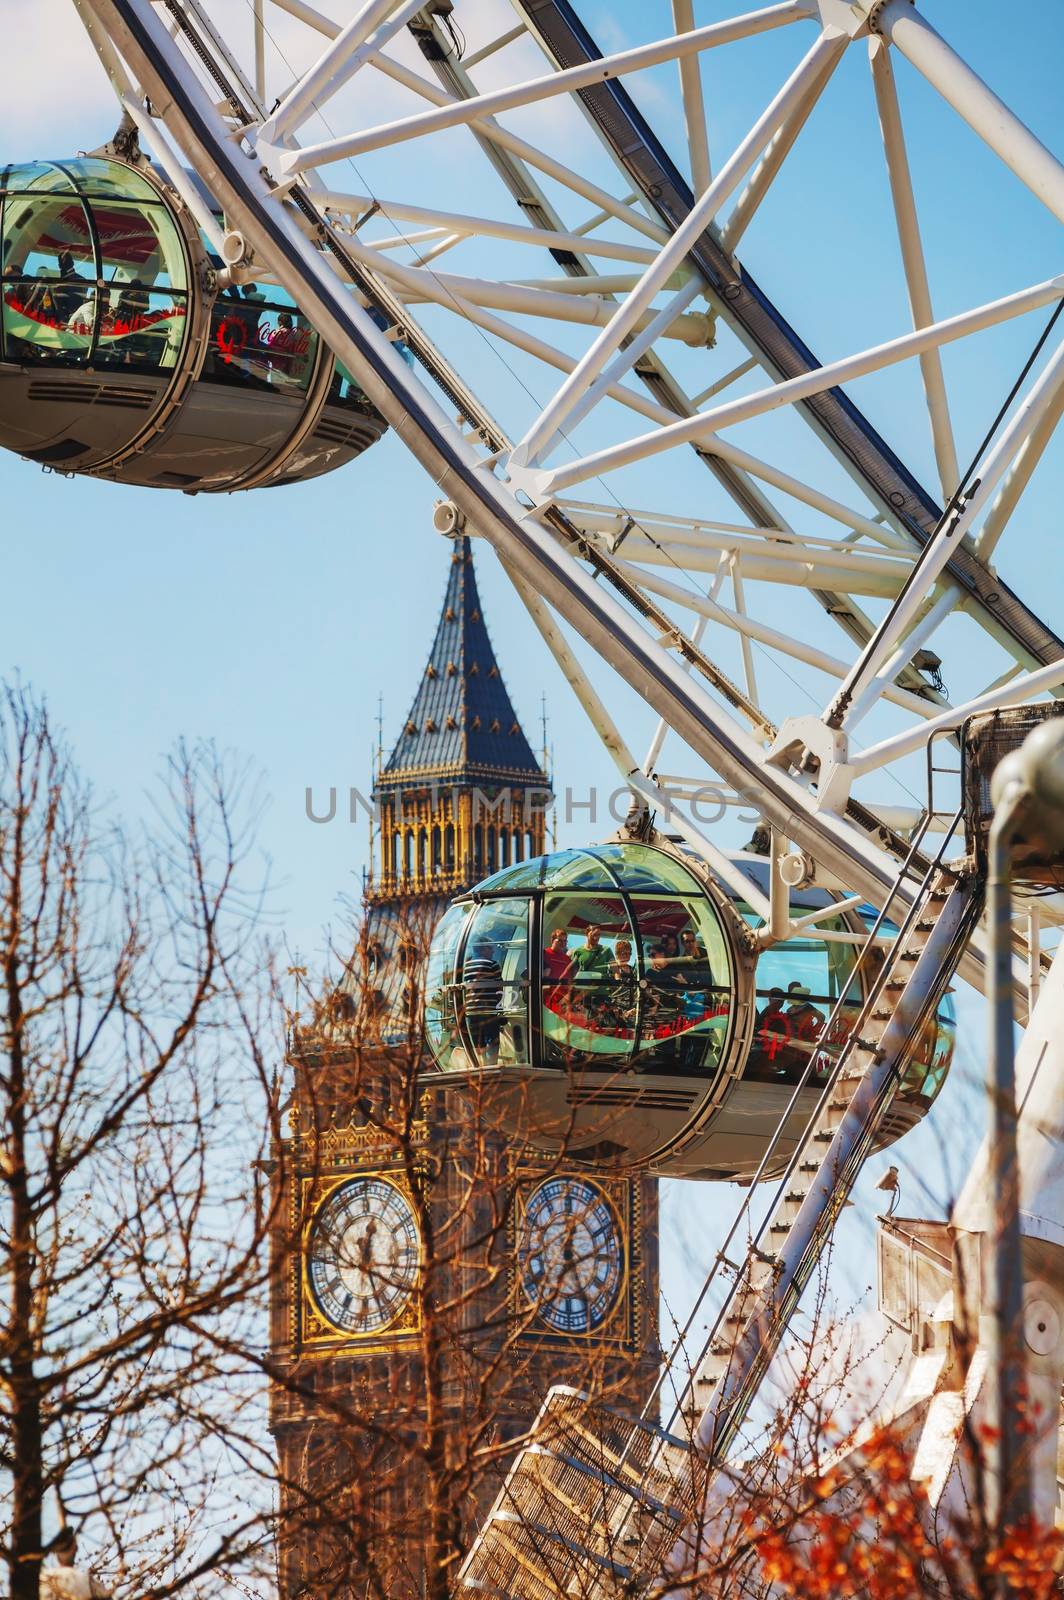 LONDON - APRIL 6: The London Eye Ferris wheel close-up on April 6, 2015 in London, UK. The entire structure is 135 metres tall and the wheel has a diameter of 120 metres.